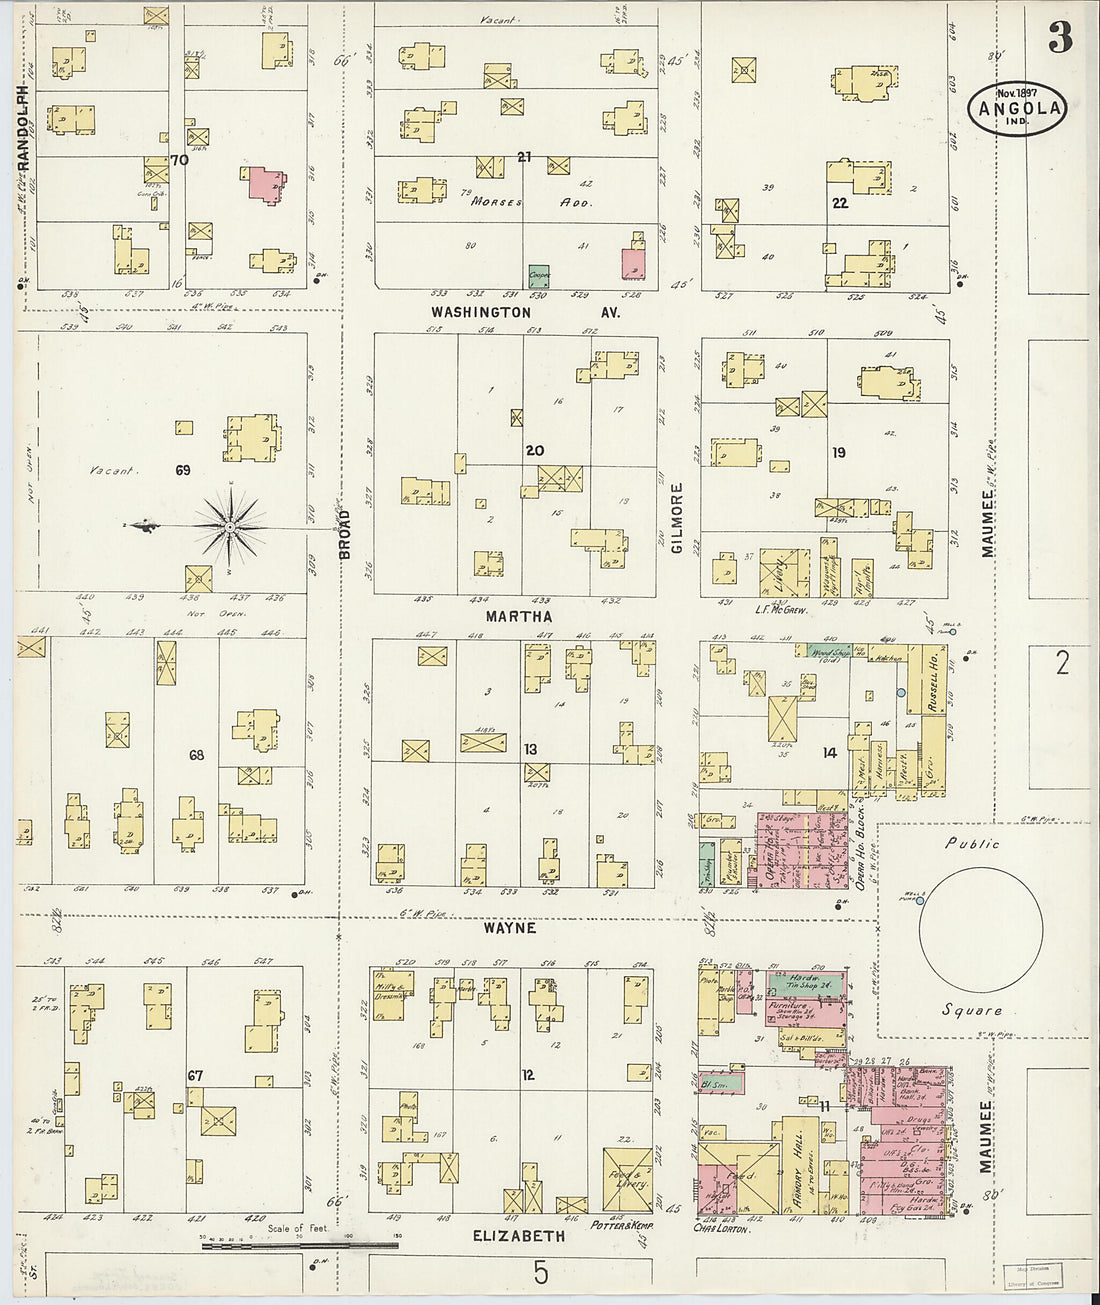 This old map of Angola, Steuben County, Indiana was created by Sanborn Map Company in 1897